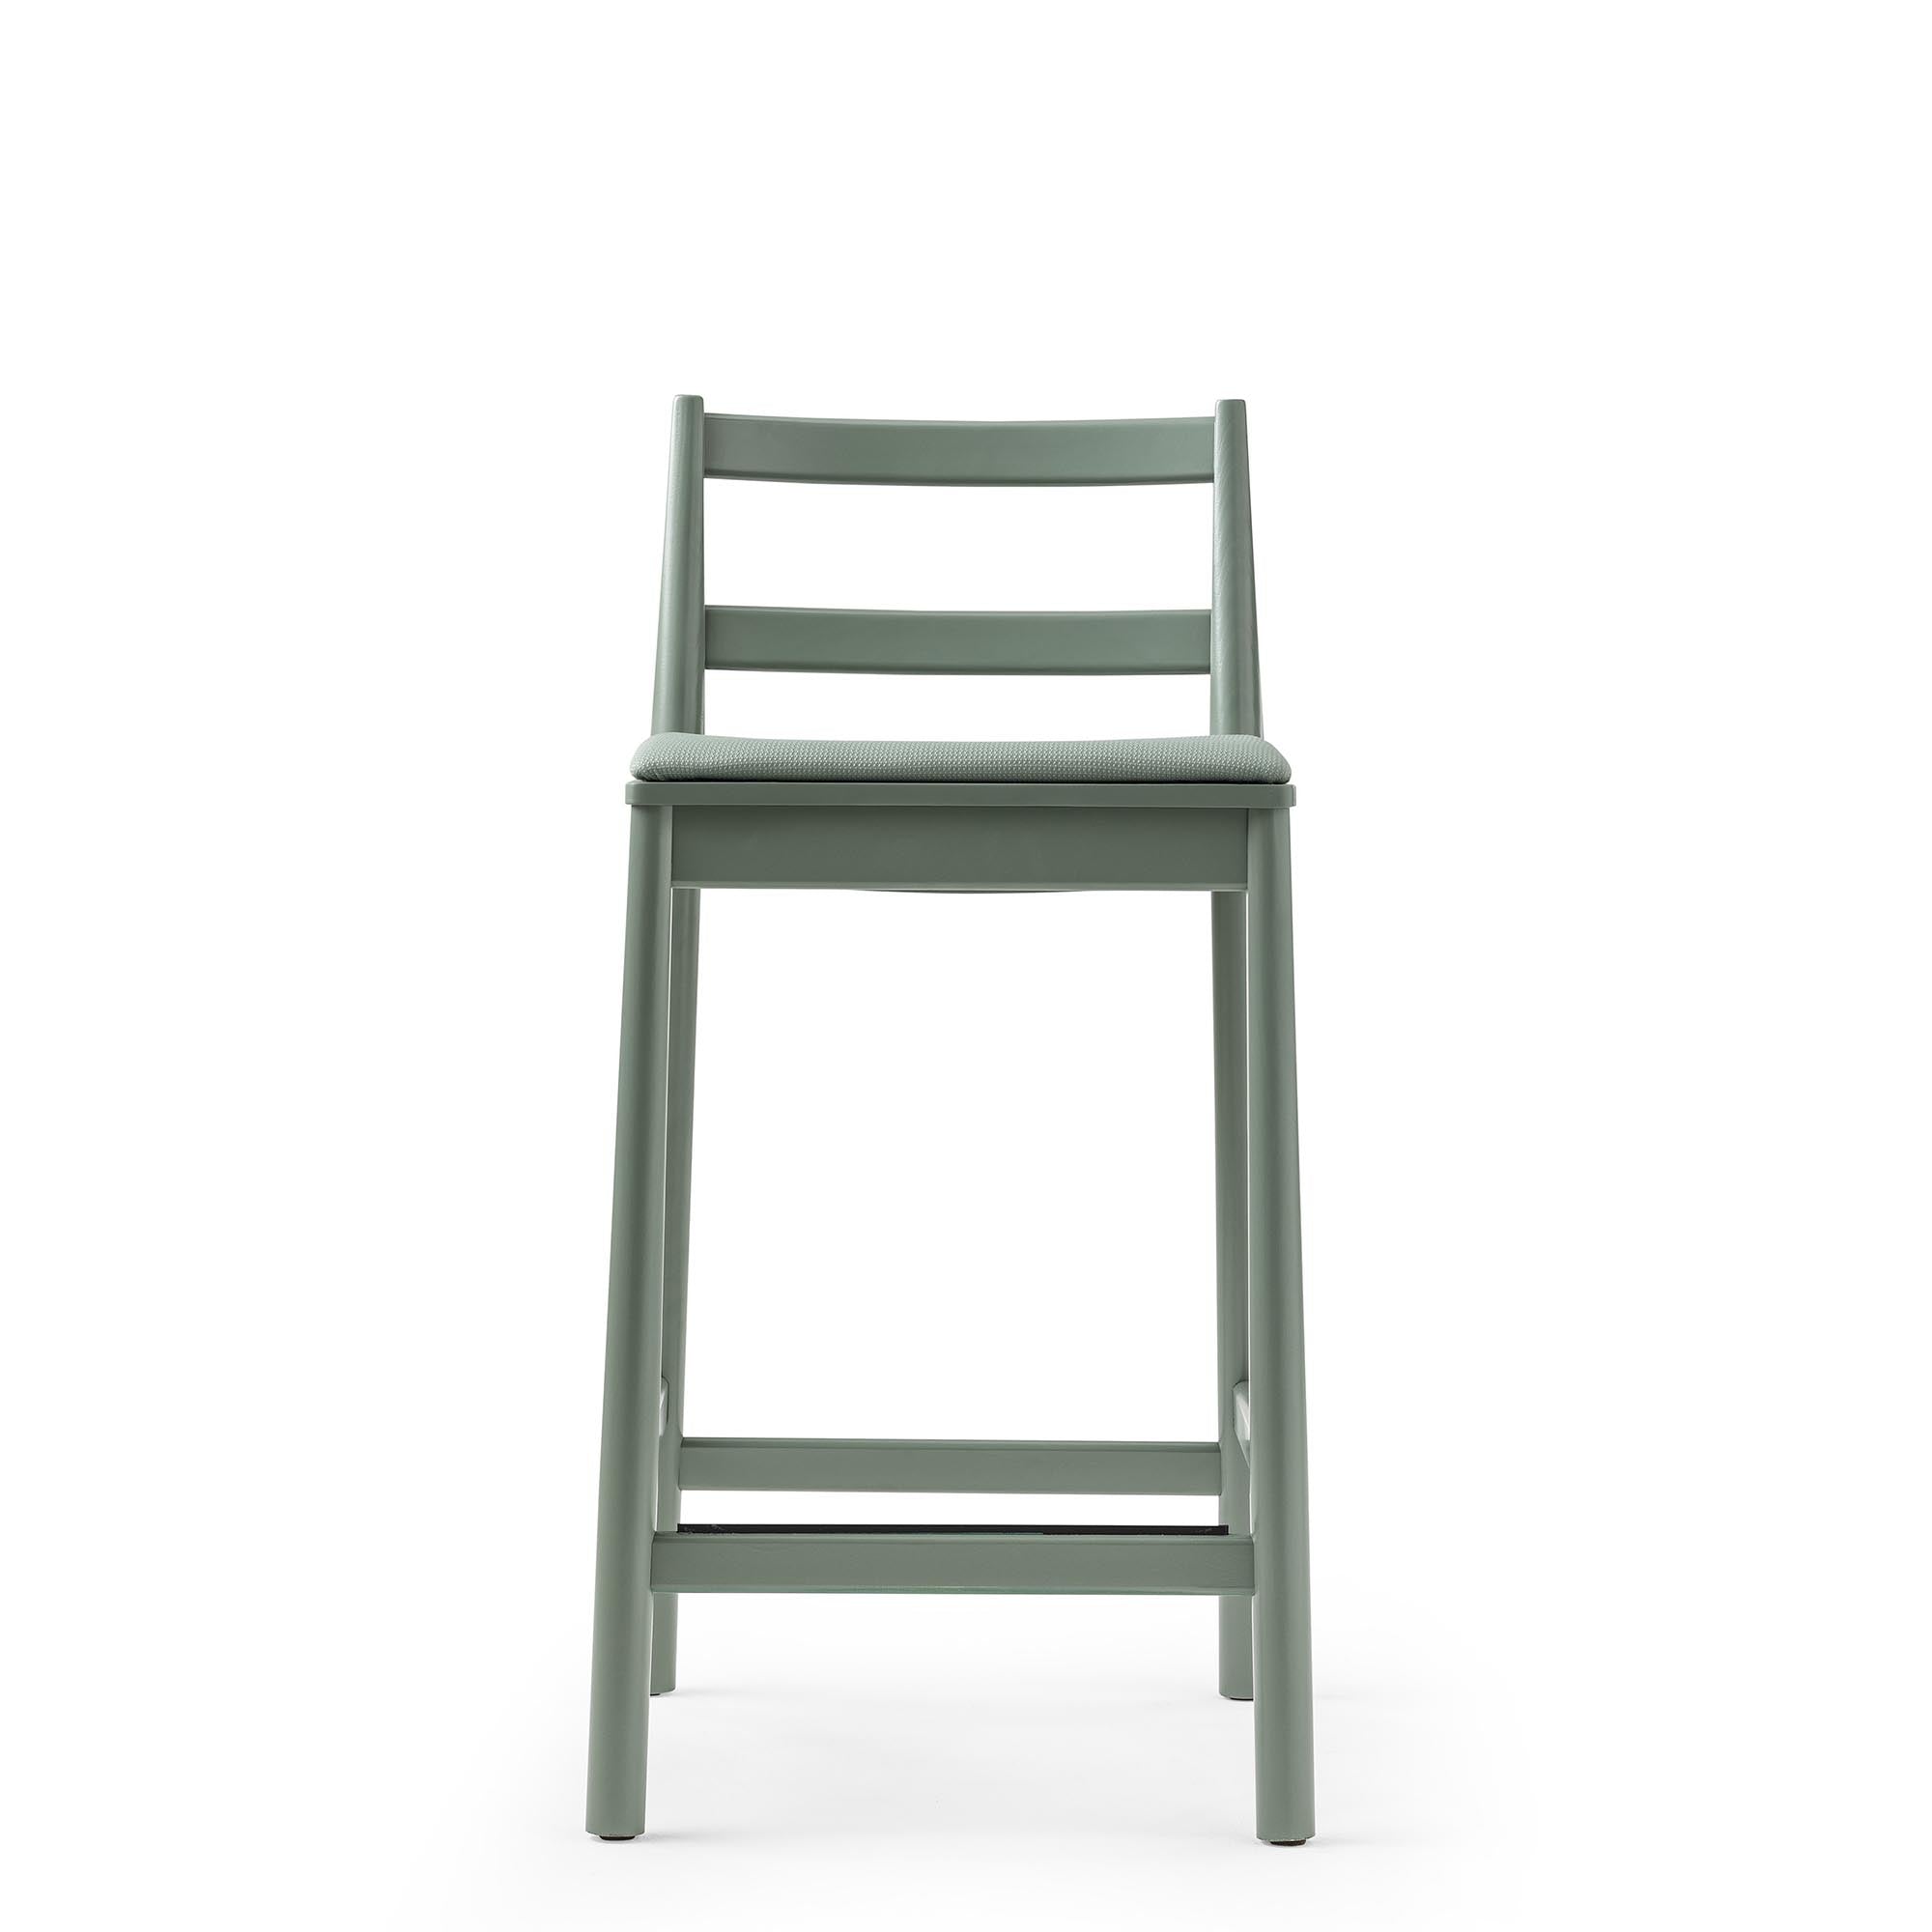 JULIE IMB Stool green seat and frame